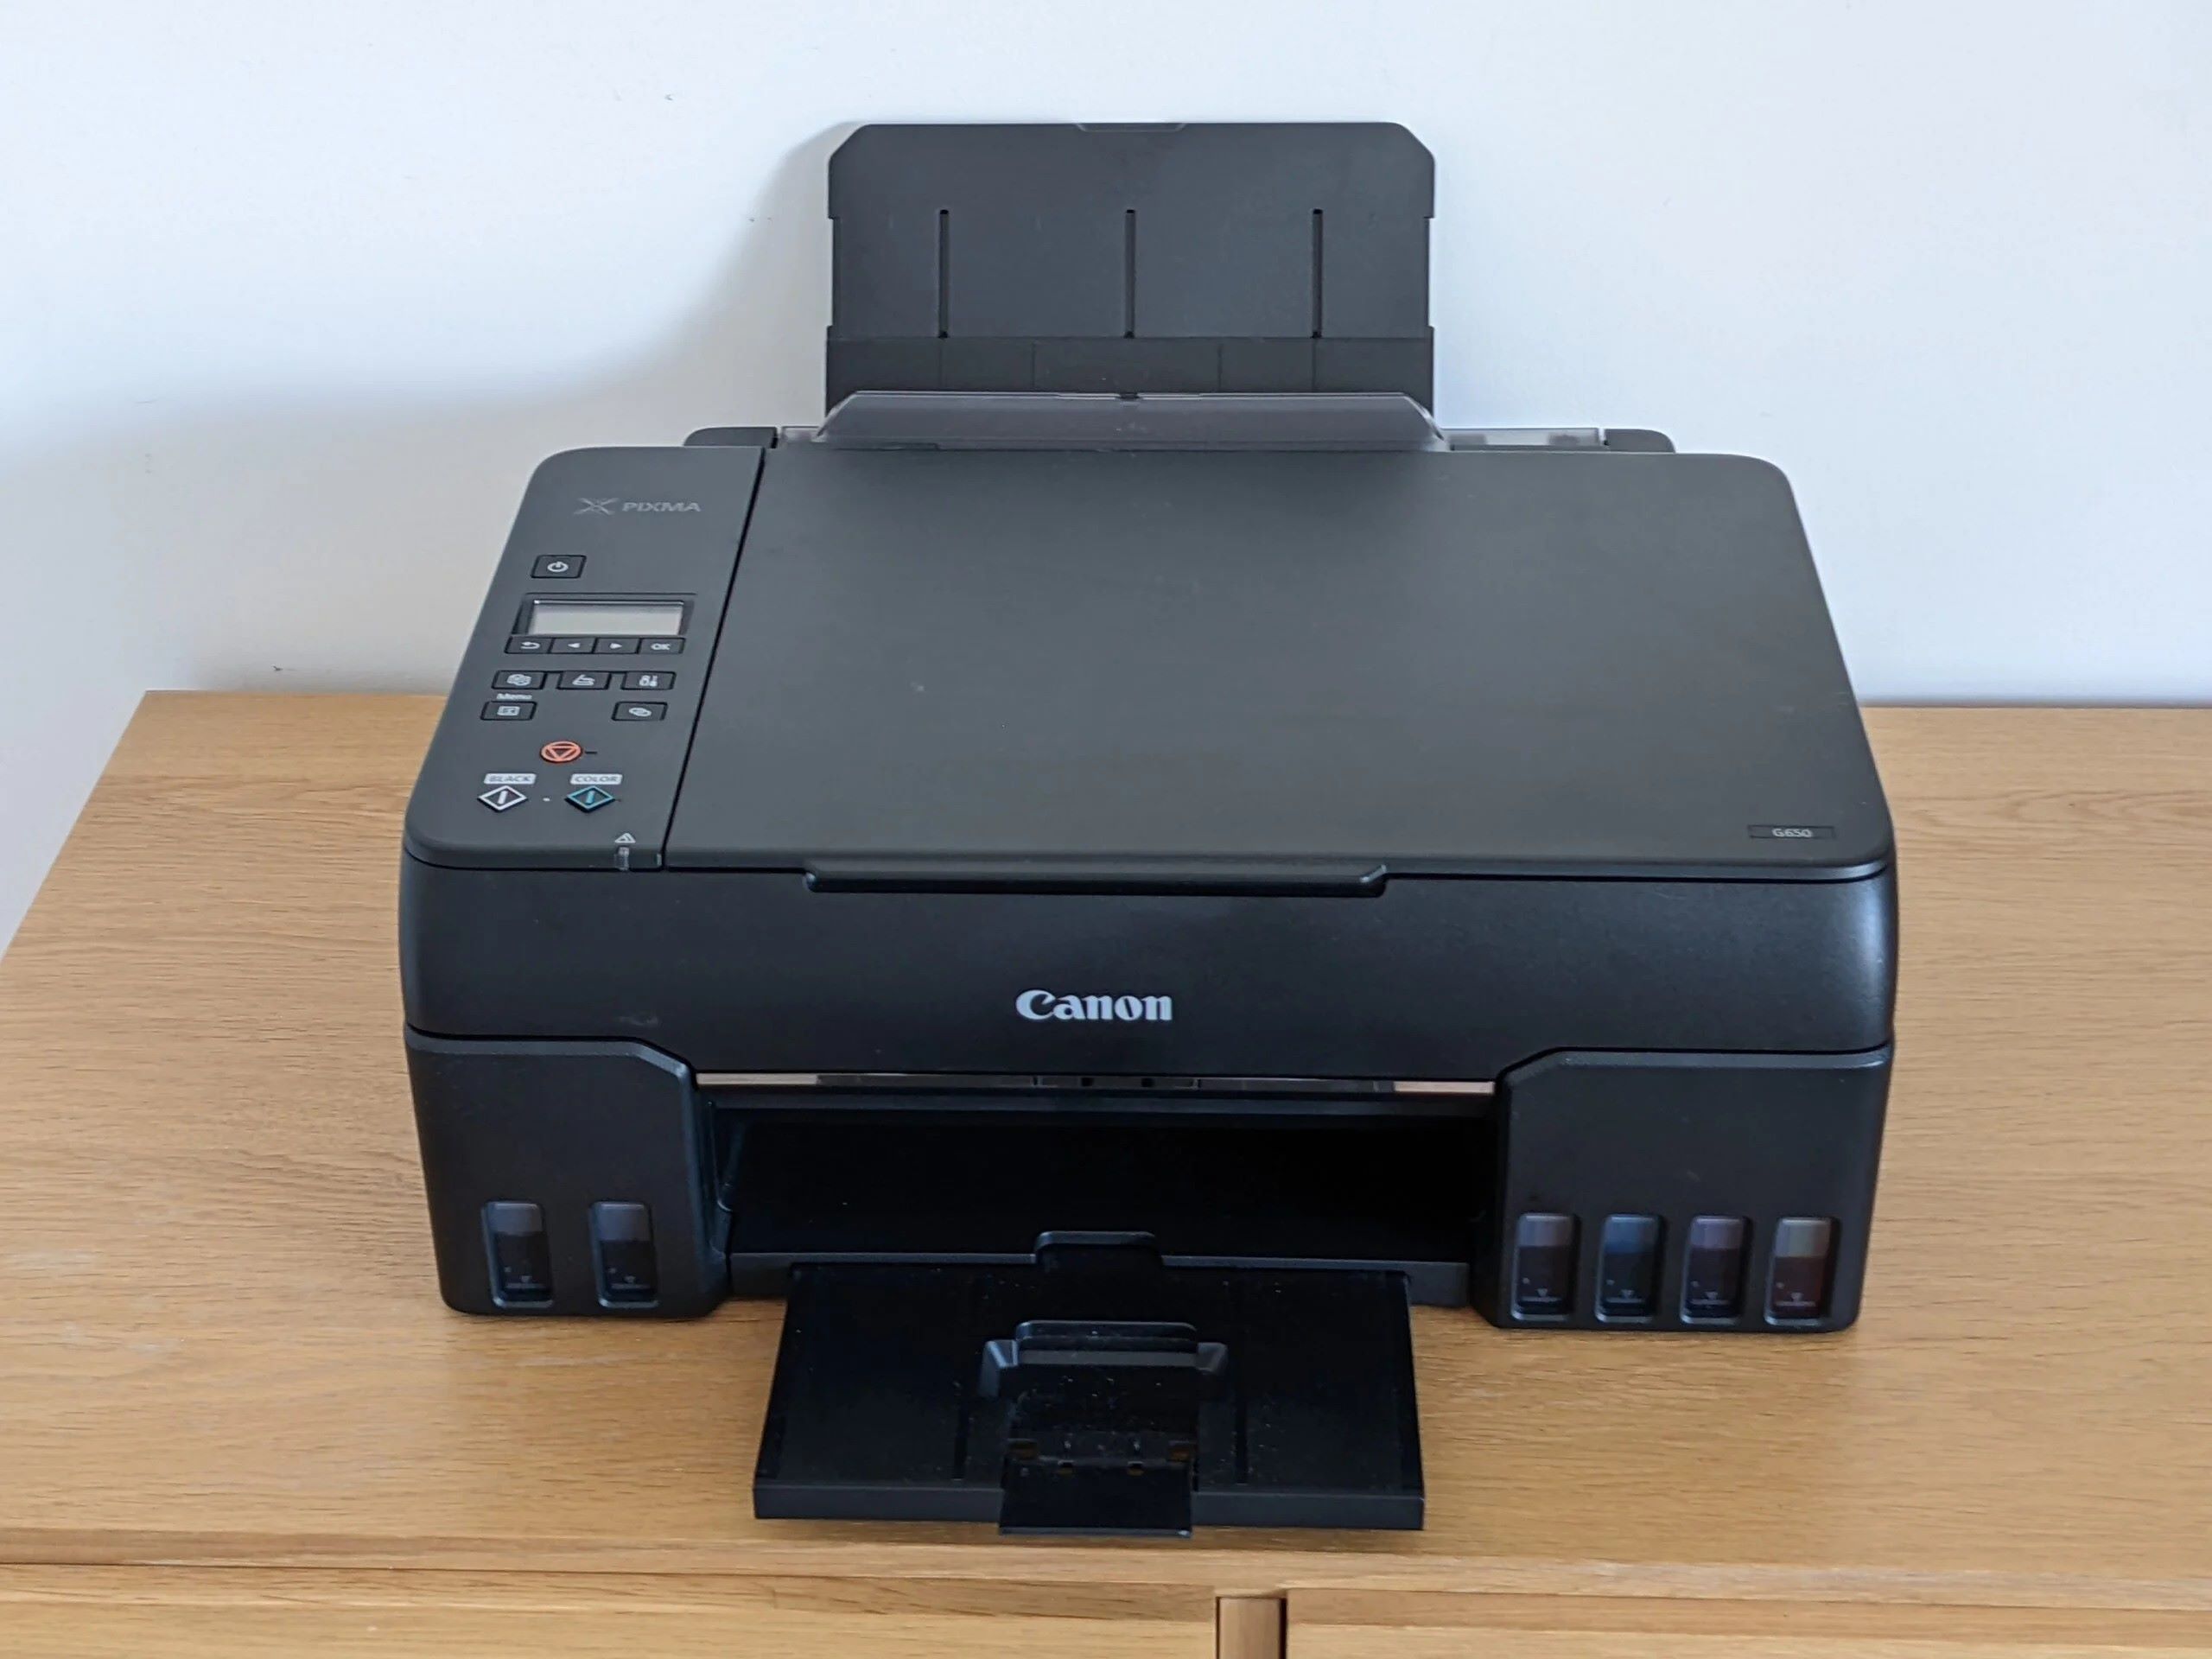 How To Fix The Orange Light On A Canon Printer